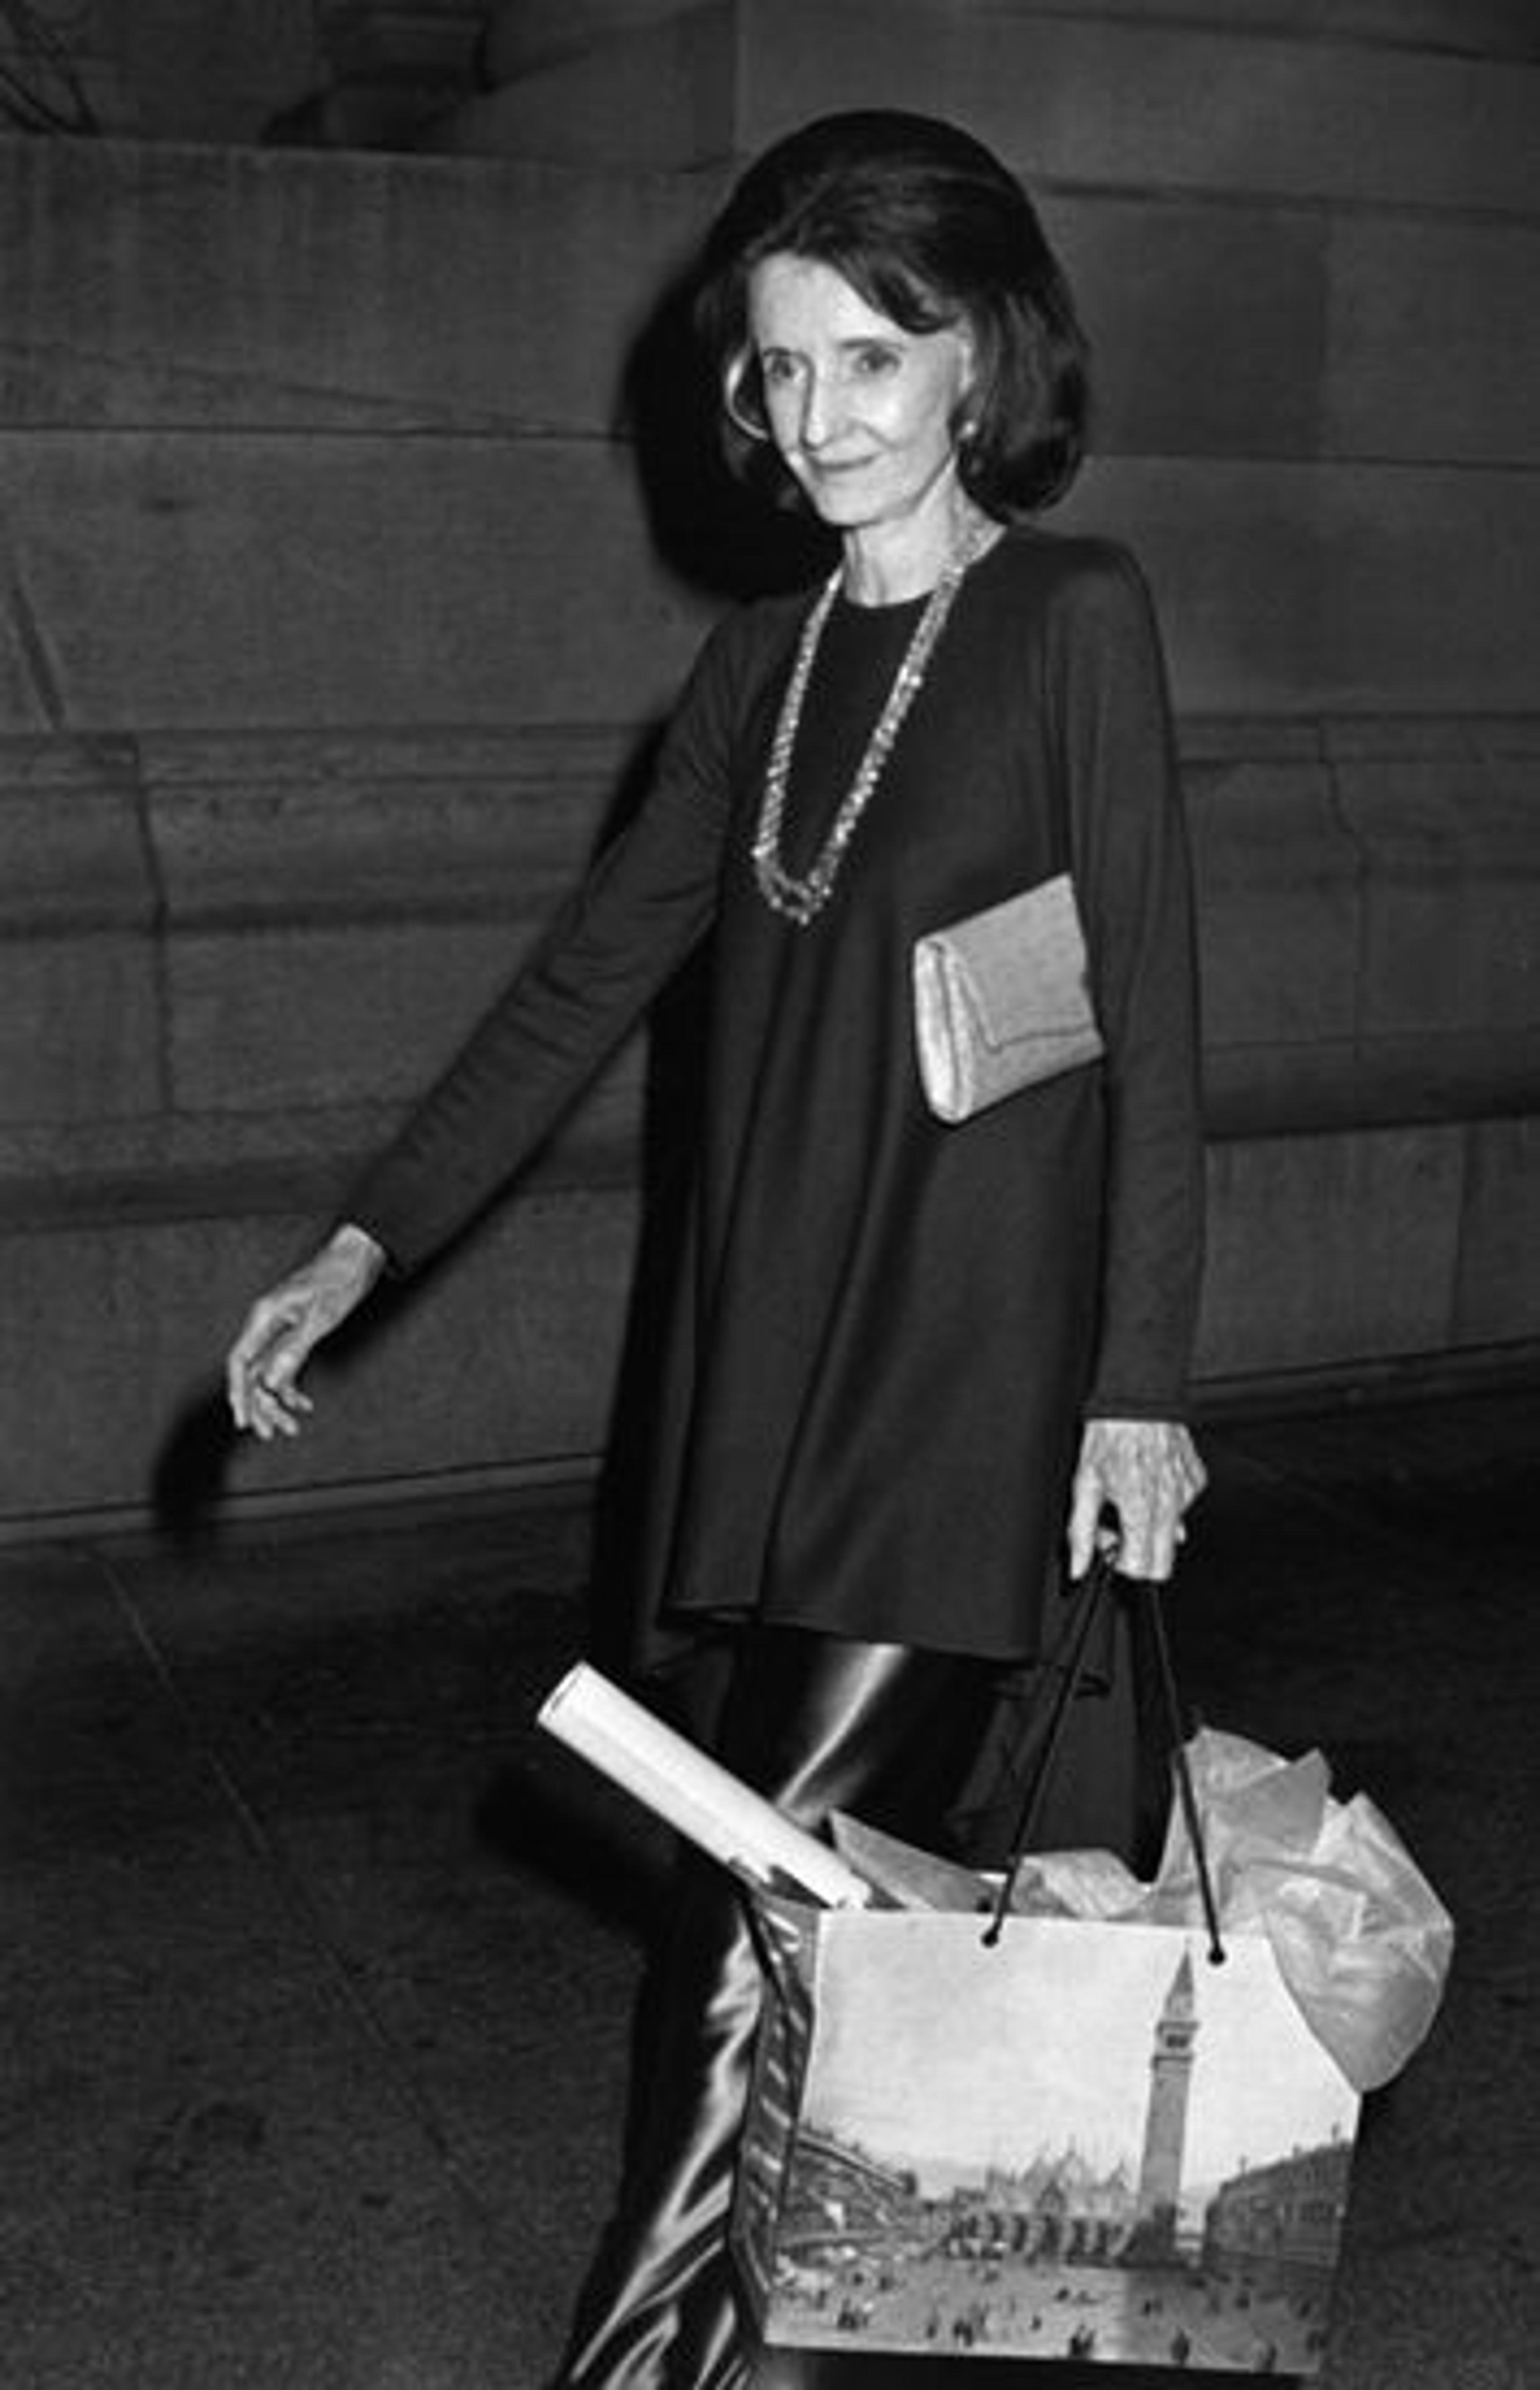 A black-and-white photo of Jayne Wrightsman attending an exhibition opening at The Metropolitan Museum of Art